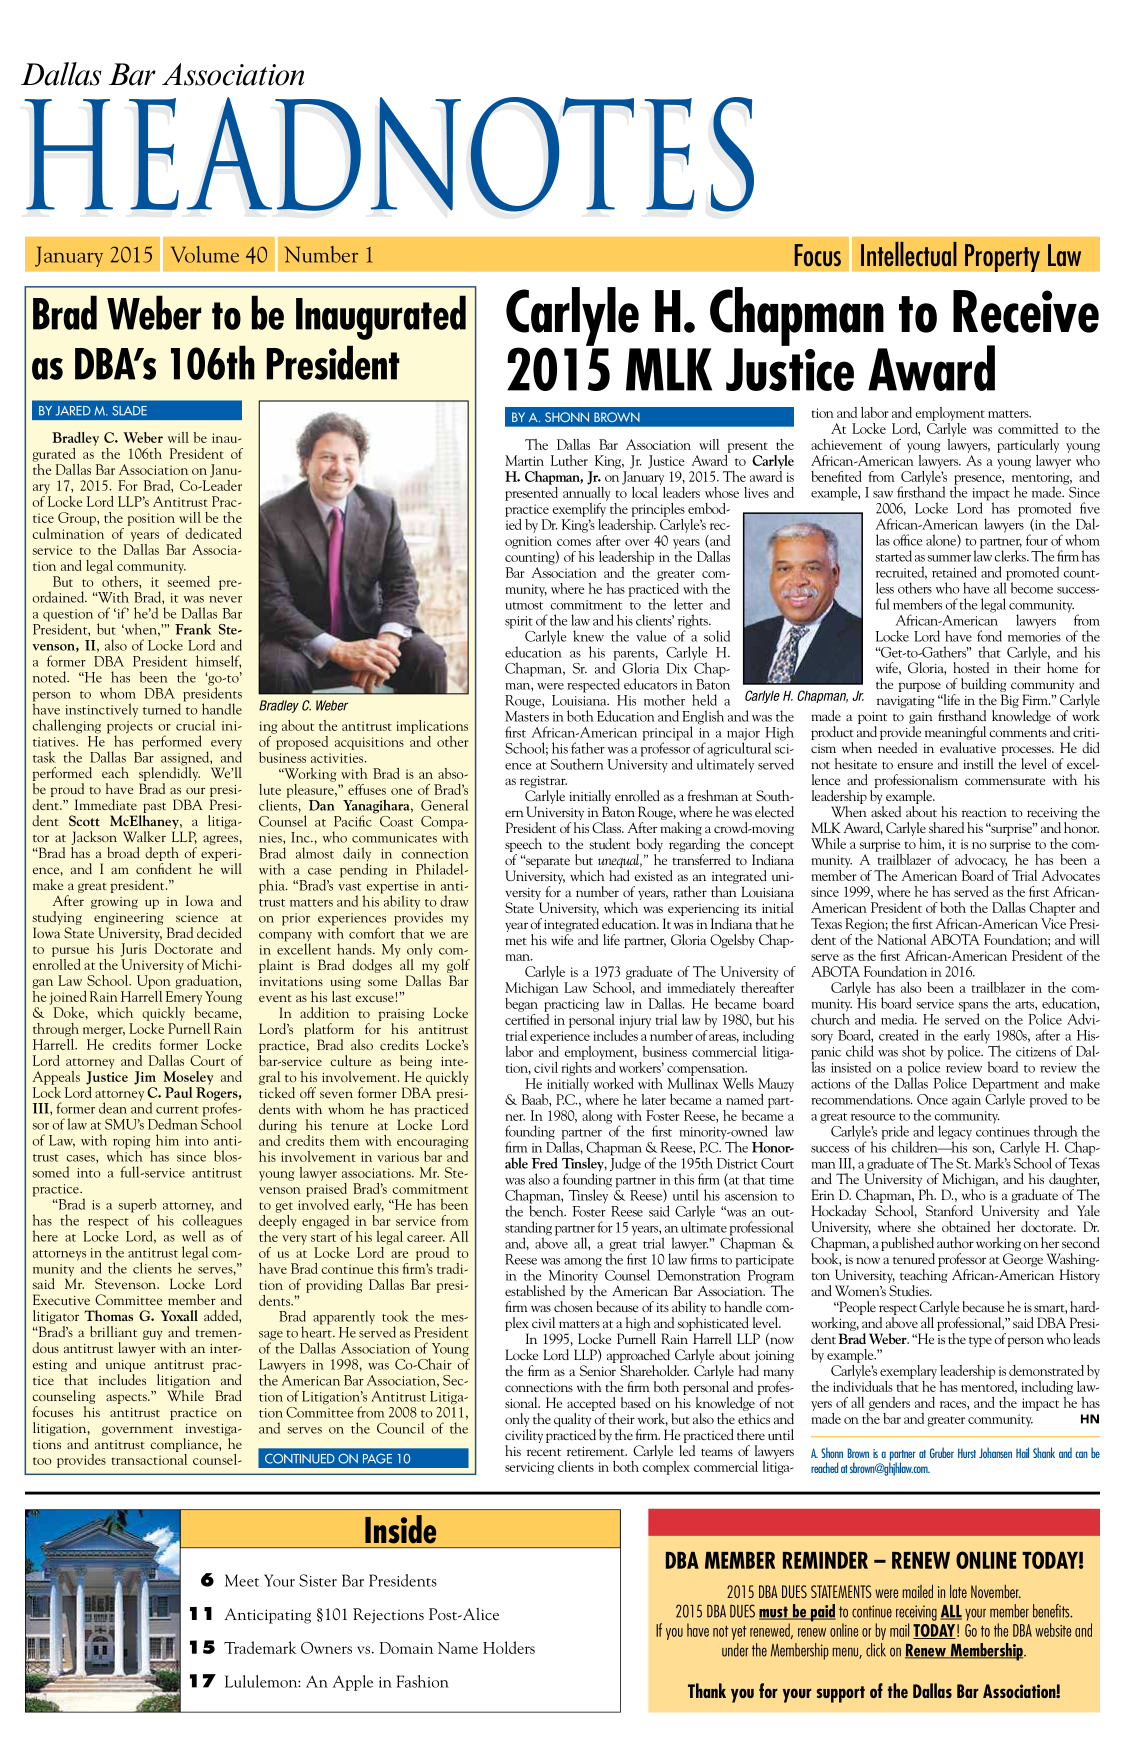 handle is hein.barjournals/hdba0040 and id is 1 raw text is: 



Dallas Bar Association


Brad Weber to be Inaugurated


as DBA's 106th President


Carlyle H. Chapman to Receive


2015 MLK Justice Award


    Bradley C. Weber will be inau-
gurated as the 106th President of
the Dallas Bar Association on Janu-
ary 17, 2015. For Brad, Co-Leader
of Locke Lord LLP's Antitrust Prac-
tice Group, the position will be the
culmination of years of dedicated
service to the Dallas Bar Associa-
tion and legal community.
    But to others, it seemed pre-
ordained. With Brad, it was never
a question of 'if' he'd be Dallas Bar
President, but 'when,' Frank Ste-
venson, II, also of Locke Lord and
a former DBA President himself,
noted. He has been the 'go-to'
person to whom DBA presidents
have instinctively turned to handle
challenging projects or crucial ini-
tiatives. He has performed every
task the Dallas Bar assigned, and
performed each splendidly. We'll
be proud to have Brad as our presi-
dent. Immediate past DBA Presi-
dent Scott McElhaney, a litiga-
tor at Jackson Walker LLP, agrees,
Brad has a broad depth of experi-
ence, and I am confident he will
make a great president.
    After growing up in Iowa and
studying   engineering  science  at
Iowa State University, Brad decided
to pursue his Juris Doctorate and
enrolled at the University of Michi-
gan Law School. Upon graduation,
he joined Rain Harrell Emery Young
& Doke, which quickly became,
through merger, Locke Purnell Rain
Harrell. He credits former Locke
Lord attorney and Dallas Court of
Appeals Justice Jim Moseley and
Lock Lord attorney C. Paul Rogers,
III, former dean and current profes-
sor of law at SMU's Dedman School
of Law, with roping him into anti-
trust cases, which has since blos-
somed into a full-service antitrust
practice.
    Brad is a superb attorney, and
has the respect of his colleagues
here at Locke Lord, as well as of
attorneys in the antitrust legal com-
munity and the clients he serves,
said Mr. Stevenson. Locke Lord
Executive Committee member and
litigator Thomas G. Yoxall added,
Brad's a brilliant guy and tremen-
dous antitrust lawyer with an inter-
esting and unique antitrust prac-
tice that includes litigation and
counseling aspects. While Brad
focuses his antitrust practice on
litigation, government investiga-
tions and antitrust compliance, he
too provides transactional counsel-


Bradley C. Weber
ing about the antitrust implications
of proposed acquisitions and other
business activities.
   Working with Brad is an abso-
lute pleasure, effuses one of Brad's
clients, Dan Yanagihara, General
Counsel at Pacific Coast Compa-
nies, Inc., who communicates with
Brad almost daily in connection
with a case pending in Philadel-
phia. Brad's vast expertise in anti-
trust matters and his ability to draw
on prior experiences provides my
company with comfort that we are
in excellent hands. My only com-
plaint is Brad dodges all my golf
invitations using some Dallas Bar
event as his last excuse!
   In addition to praising Locke
Lord's platform for his antitrust
practice, Brad also credits Locke's
bar-service culture as being inte-
gral to his involvement. He quickly
ticked off seven former DBA presi-
dents with whom he has practiced
during his tenure at Locke Lord
and credits them with encouraging
his involvement in various bar and
young lawyer associations. Mr. Ste-
venson praised Brad's commitment
to get involved early, He has been
deeply engaged in bar service from
the very start of his legal career. All
of us at Locke Lord are proud to
have Brad continue this firm's tradi-
tion of providing Dallas Bar presi-
dents.
   Brad apparently took the mes-
sage to heart. He served as President
of the Dallas Association of Young
Lawyers in 1998, was Co-Chair of
the American Bar Association, Sec-
tion of Litigation's Antitrust Litiga-
tion Committee from 2008 to 2011,
and serves on the Council of the


   The Dallas Bar Association will present the
Martin Luther King, Jr. Justice Award to Carlyle
H. Chapman, Jr. on January 19, 2015. The award is
presented annually to local leaders whose lives and
practice exemplify the principles embod-
ied by Dr. King's leadership. Carlyle's rec-
ognition comes after over 40 years (and
counting) of his leadership in the Dallas
Bar Association and the greater com-
munity, where he has practiced with the
utmost commitment to the letter and
spirit of the law and his clients' rights.
   Carlyle knew the value of a solid
education as his parents, Carlyle H.
Chapman, Sr. and Gloria Dix Chap-
man, were respected educators in Baton
Rouge, Louisiana. His mother held a     Carlyle H.
Masters in both Education and English and was the
first African-American principal in a major High
School; his father was a professor of agricultural sci-
ence at Southern University and ultimately served
as registrar.
   Carlyle initially enrolled as a freshman at South-
ern University in Baton Rouge, where he was elected
President of his Class. After making a crowd-moving
speech to the student body regarding the concept
of separate but unequal, he transferred to Indiana
University, which had existed as an integrated uni-
versity for a number of years, rather than Louisiana
State University, which was experiencing its initial
year of integrated education. It was in Indiana that he
met his wife and life partner, Gloria Ogelsby Chap-
man.
   Carlyle is a 1973 graduate of The University of
Michigan Law School, and immediately thereafter
began practicing law in Dallas. He became board
certified in personal injury trial law by 1980, but his
trial experience includes a number of areas, including
labor and employment, business commercial litiga-
tion, civil rights and workers' compensation.
   He initially worked with Mullinax Wells Mauzy
& Baab, P.C., where he later became a named part-
ner. In 1980, along with Foster Reese, he became a
founding partner of the first minority-owned law
firm in Dallas, Chapman & Reese, P.C. The Honor-
able Fred Tinsley, Judge of the 195th District Court
was also a founding partner in this firm (at that time
Chapman, Tinsley & Reese) until his ascension to
the bench. Foster Reese said Carlyle was an out-
standing partner for 15 years, an ultimate professional
and, above all, a great trial lawyer. Chapman &
Reese was among the first 10 law firms to participate
in the Minority Counsel Demonstration Program
established by the American Bar Association. The
firm was chosen because of its ability to handle com-
plex civil matters at a high and sophisticated level.
   In 1995, Locke Purnell Rain Harrell LLP (now
Locke Lord LLP) approached Carlyle about joining
the firm as a Senior Shareholder. Carlyle had many
connections with the firm both personal and profes-
sional. He accepted based on his knowledge of not
only the quality of their work, but also the ethics and
civility practiced by the firm. He practiced there until
his recent retirement. Carlyle led teams of lawyers
servicing clients in both complex commercial litiga-


Ch


tion and labor and employment matters.
    At Locke Lord, Carlyle was committed to the
achievement of young lawyers, particularly young
African-American lawyers. As a young lawyer who
benefited from Carlyle's presence, mentoring, and
example, I saw firsthand the impact he made. Since
           2006, Locke Lord has promoted five
           African-American lawyers (in the Dal-
           las office alone) to partner, four of whom
           started as summer law clerks. The firm has
           recruited, retained and promoted count-
           less others who have all become success-
           ful members of the legal community.
              African-American    lawyers   from
           Locke Lord have fond memories of the
           Get-to-Gathers that Carlyle, and his
           wife, Gloria, hosted in their home for
           the purpose of building community and
hapman, Jr. navigating life in the Big Firm. Carlyle
made a point to gain firsthand knowledge of work
product and provide meaningful comments and criti-
cism when needed in evaluative processes. He did
not hesitate to ensure and instill the level of excel-
lence and professionalism commensurate with his
leadership by example.
    When asked about his reaction to receiving the
MLK Award, Carlyle shared his surprise and honor.
While a surprise to him, it is no surprise to the com-
munity. A trailblazer of advocacy, he has been a
member of The American Board of Trial Advocates
since 1999, where he has served as the first African-
American President of both the Dallas Chapter and
Texas Region; the first African-American Vice Presi-
dent of the National ABOTA Foundation; and will
serve as the first African-American President of the
ABOTA Foundation in 2016.
    Carlyle has also been a trailblazer in the com-
munity. His board service spans the arts, education,
church and media. He served on the Police Advi-
sory Board, created in the early 1980s, after a His-
panic child was shot by police. The citizens of Dal-
las insisted on a police review board to review the
actions of the Dallas Police Department and make
recommendations. Once again Carlyle proved to be
a great resource to the community.
    Carlyle's pride and legacy continues through the
success of his children his son, Carlyle H. Chap-
man III, a graduate of The St. Mark's School of Texas
and The University of Michigan, and his daughter,
Erin D. Chapman, Ph. D., who is a graduate of The
Hockaday School, Stanford University and Yale
University, where she obtained her doctorate. Dr.
Chapman, a published author working on her second
book, is now a tenured professor at George Washing-
ton University, teaching African-American History
and Women's Studies.
    People respect Carlyle because he is smart, hard-
working, and above all professional, said DBA Presi-
dent Brad Weber. He is the type of person who leads
by example.
    Carlyle's exemplary leadership is demonstrated by
the individuals that he has mentored, including law-
yers of all genders and races, and the impact he has
made on the bar and greater community.       H N

A. Shonn Brown is a partner at Gruber Hurst Johansen Hail Shank and can be
reached at sbrown@ghihlaw.xom.


0 Meet Your Sister Bar Presidents


1 1 Anticipating §101 Rejections Post-Alice

1 5 Trademark Owners vs. Domain Name Holders


1 7 Lululemon: An Apple in Fashion


I


